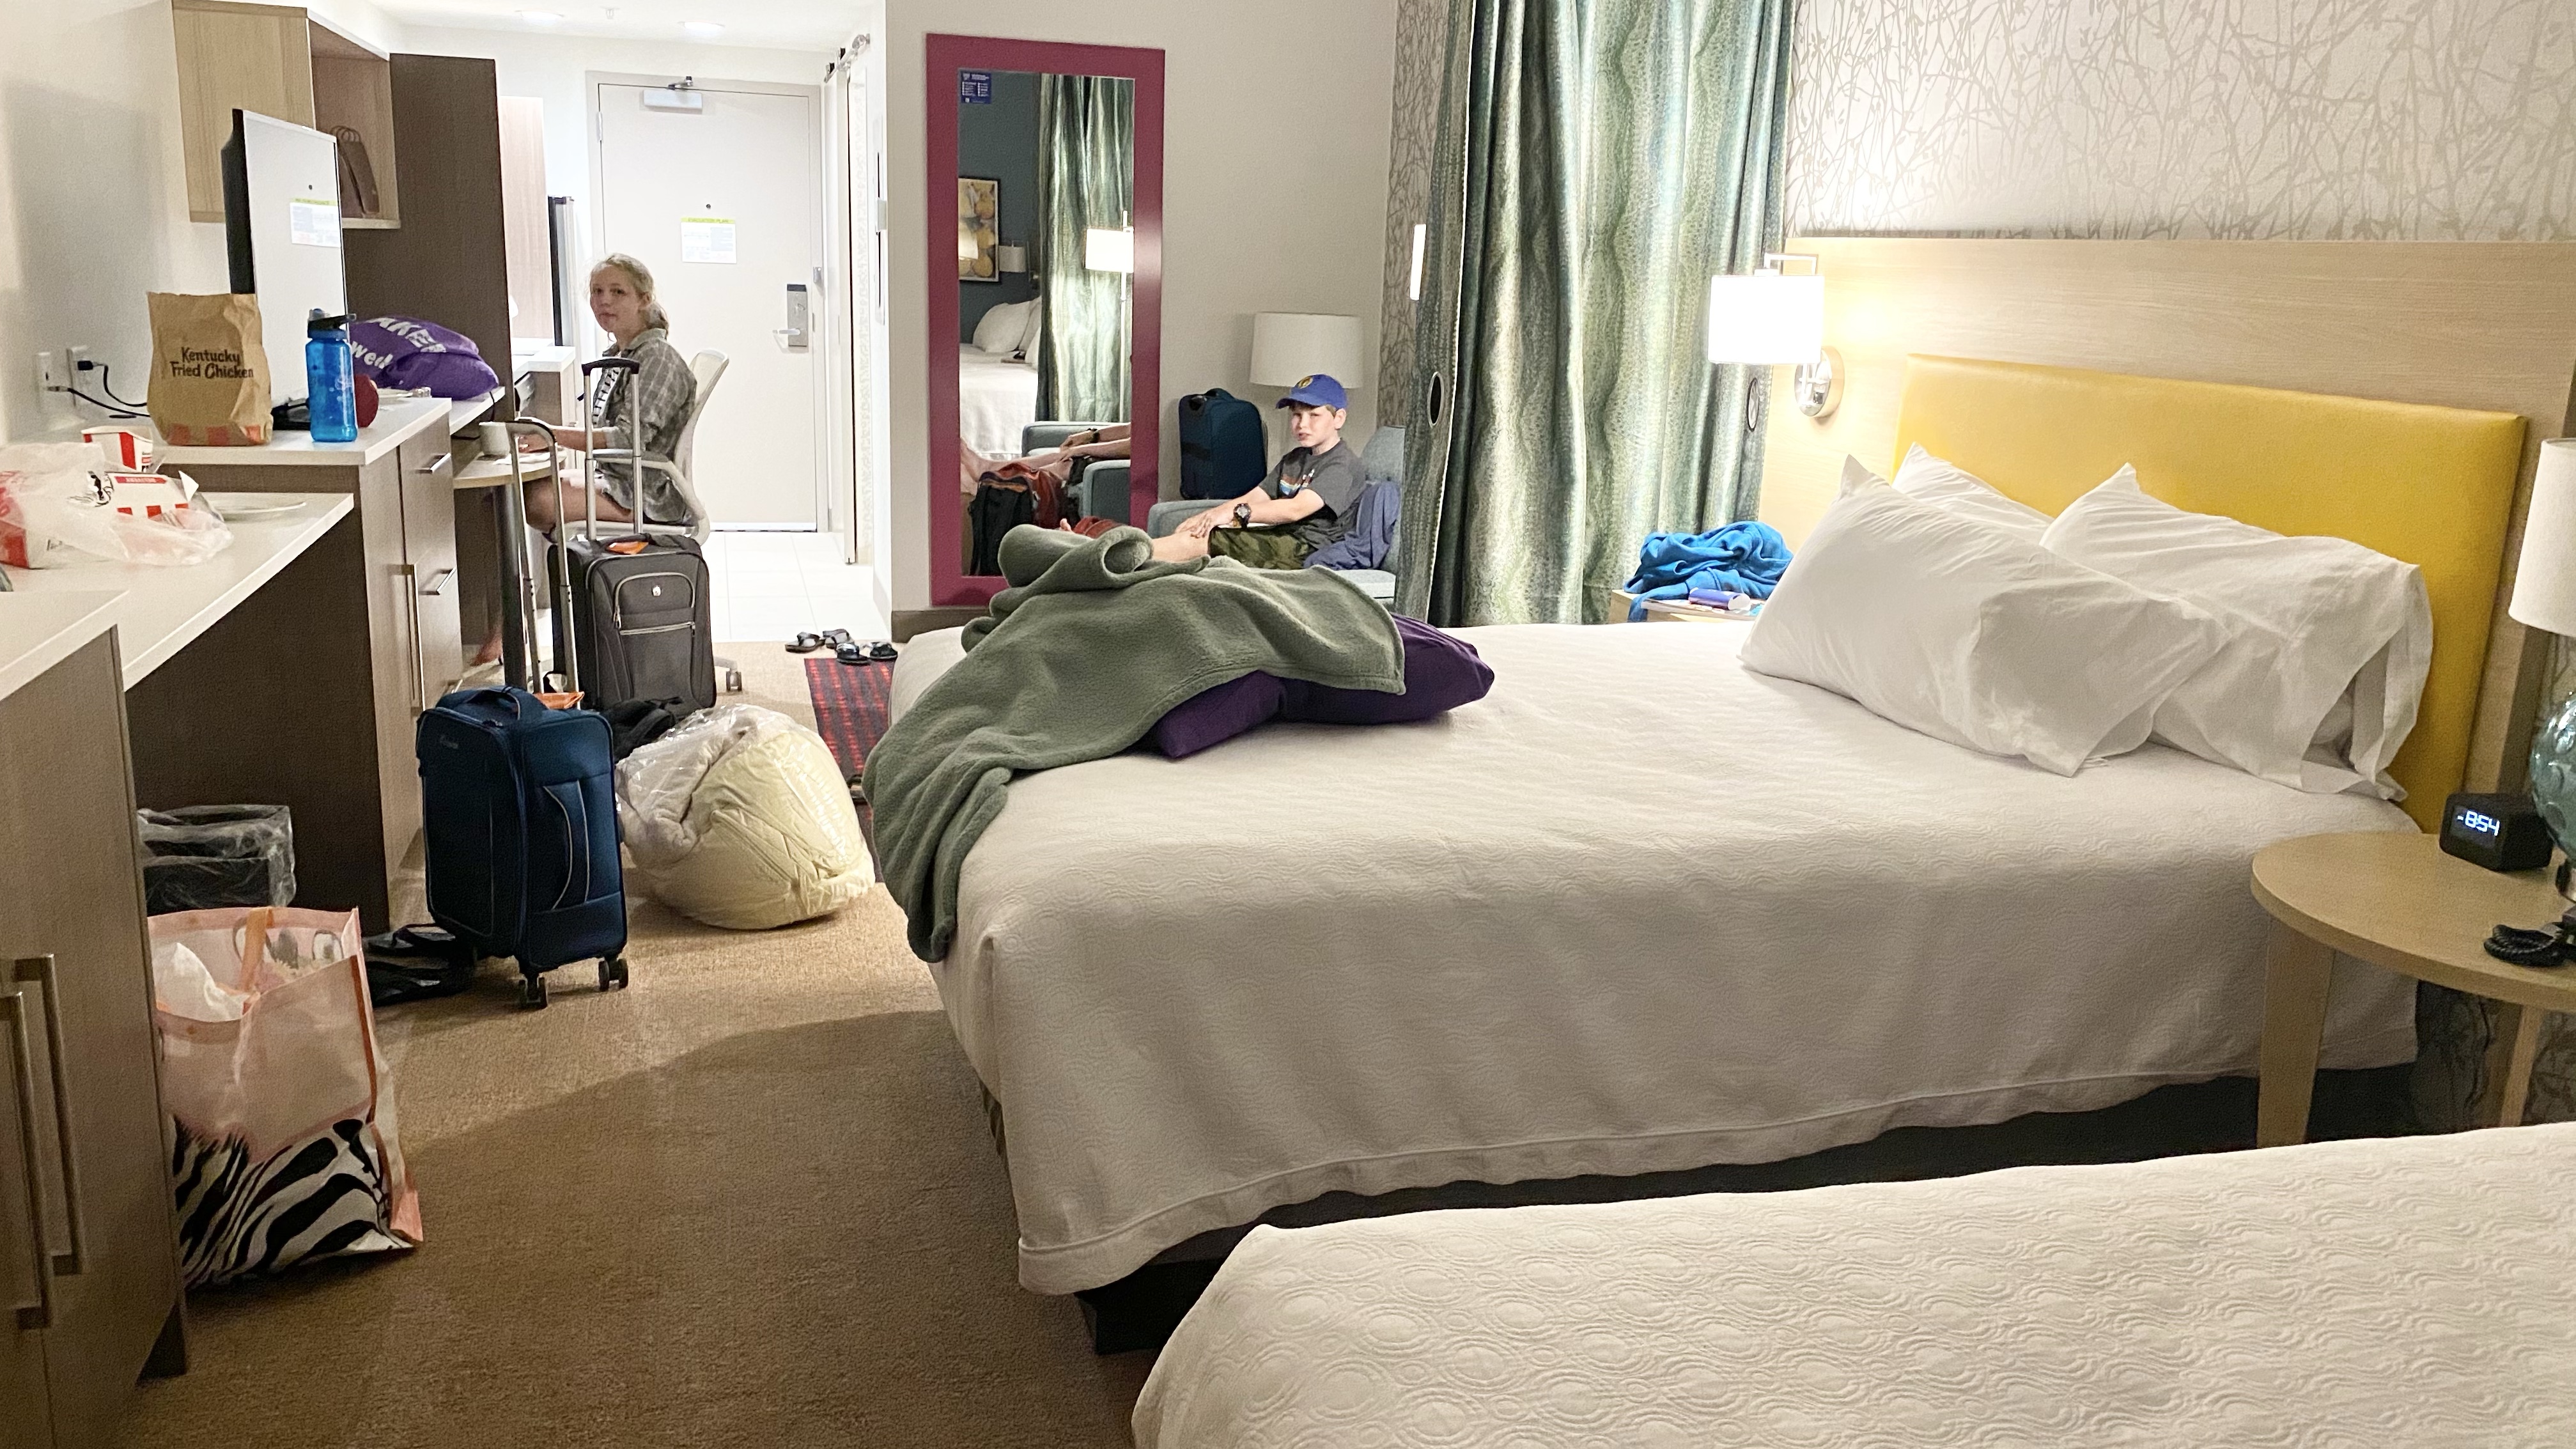 Prioritizing Hotel Stay with Kitchens and Enough Beds